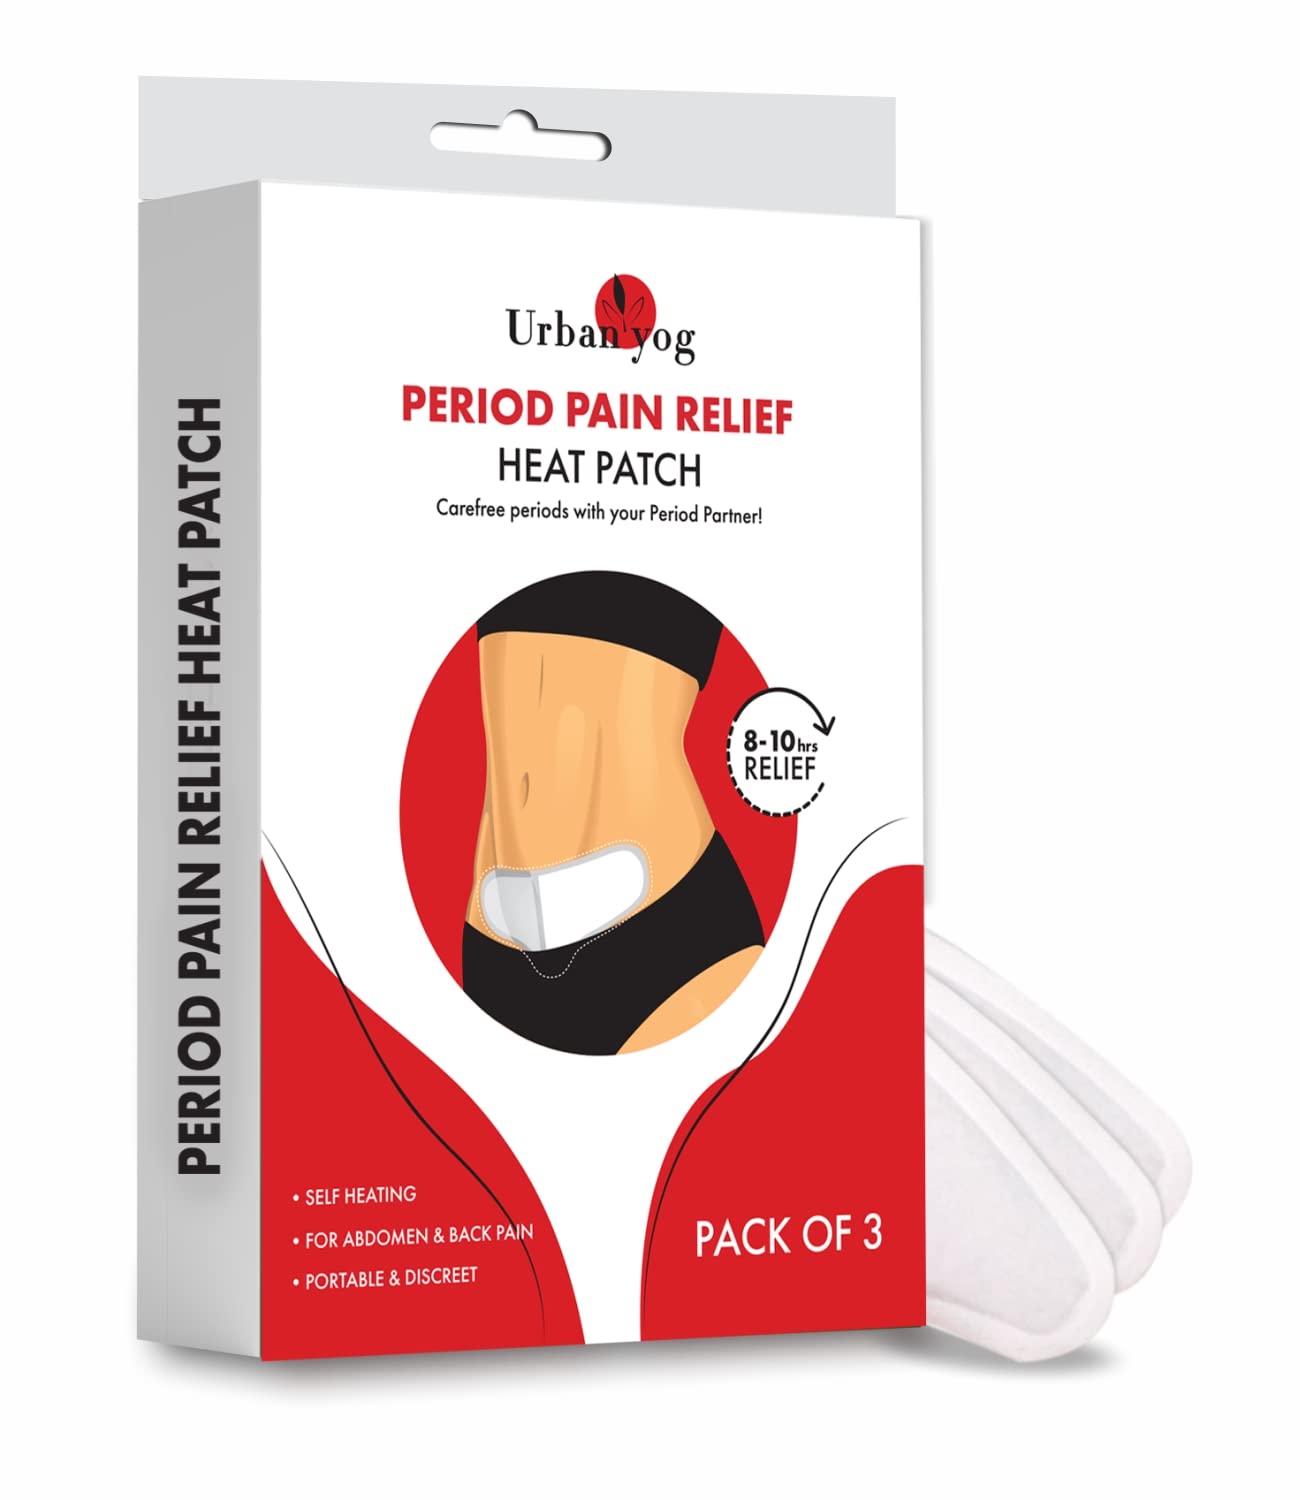 Urban yog Period Pain Relief Heat Patches Pack of 3  lasts for 10 hrs  sticks on skin  100 Natural  Relief from menstrual  back pain